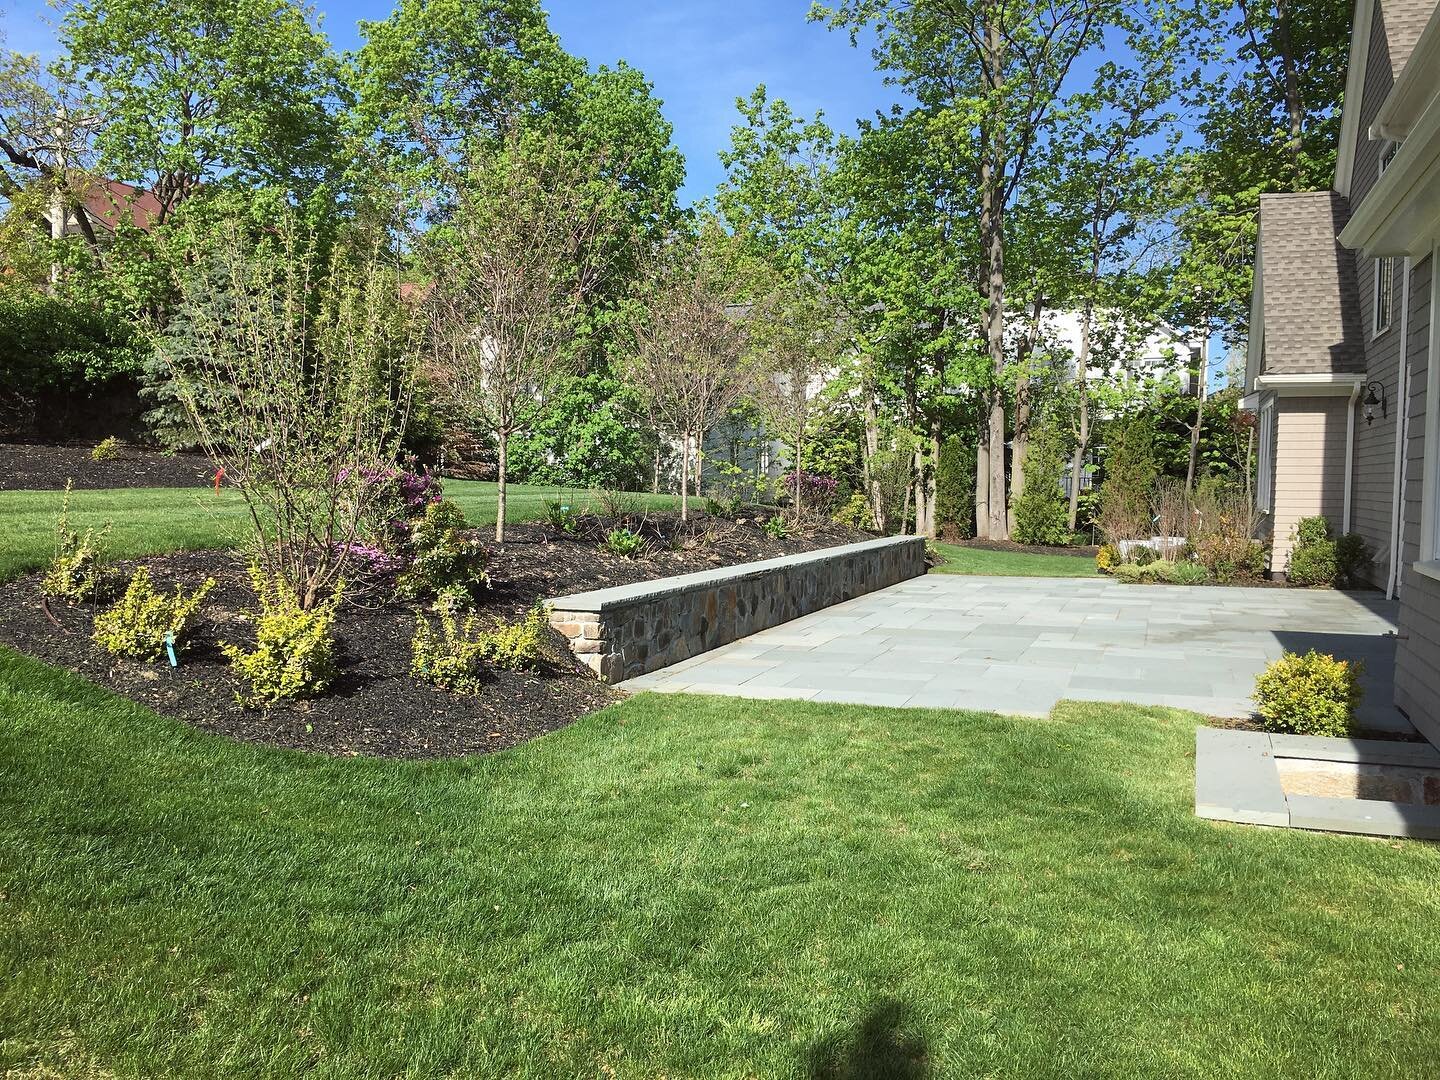 A functional outdoor space complete with hardscape designed around bluestone patio with retaining wall and landscape beds